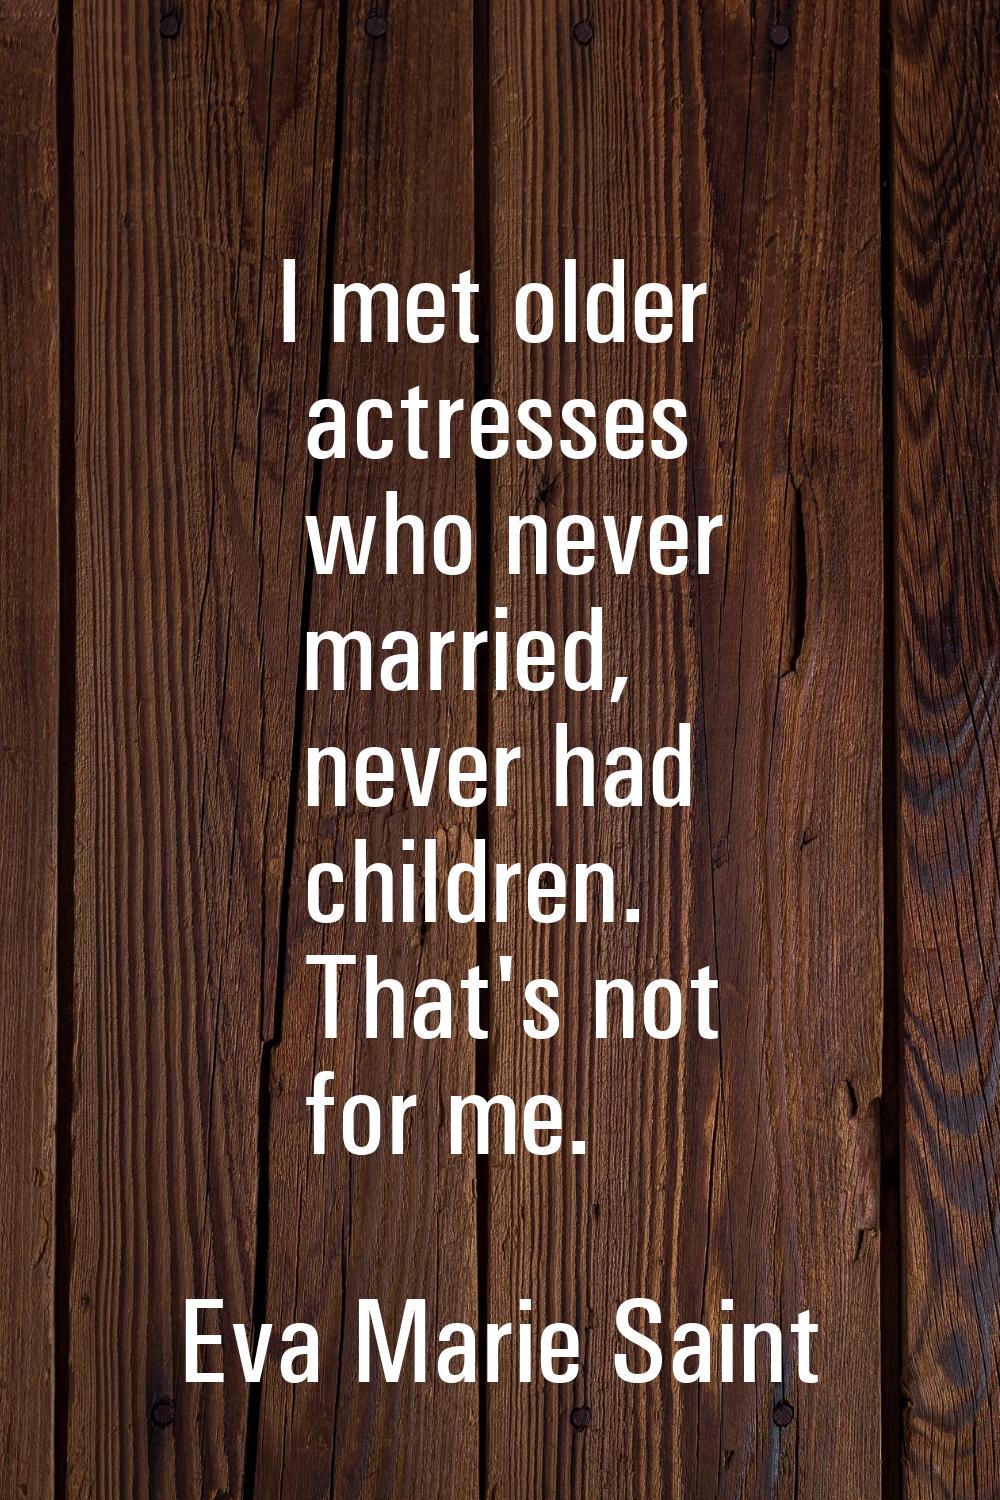 I met older actresses who never married, never had children. That's not for me.